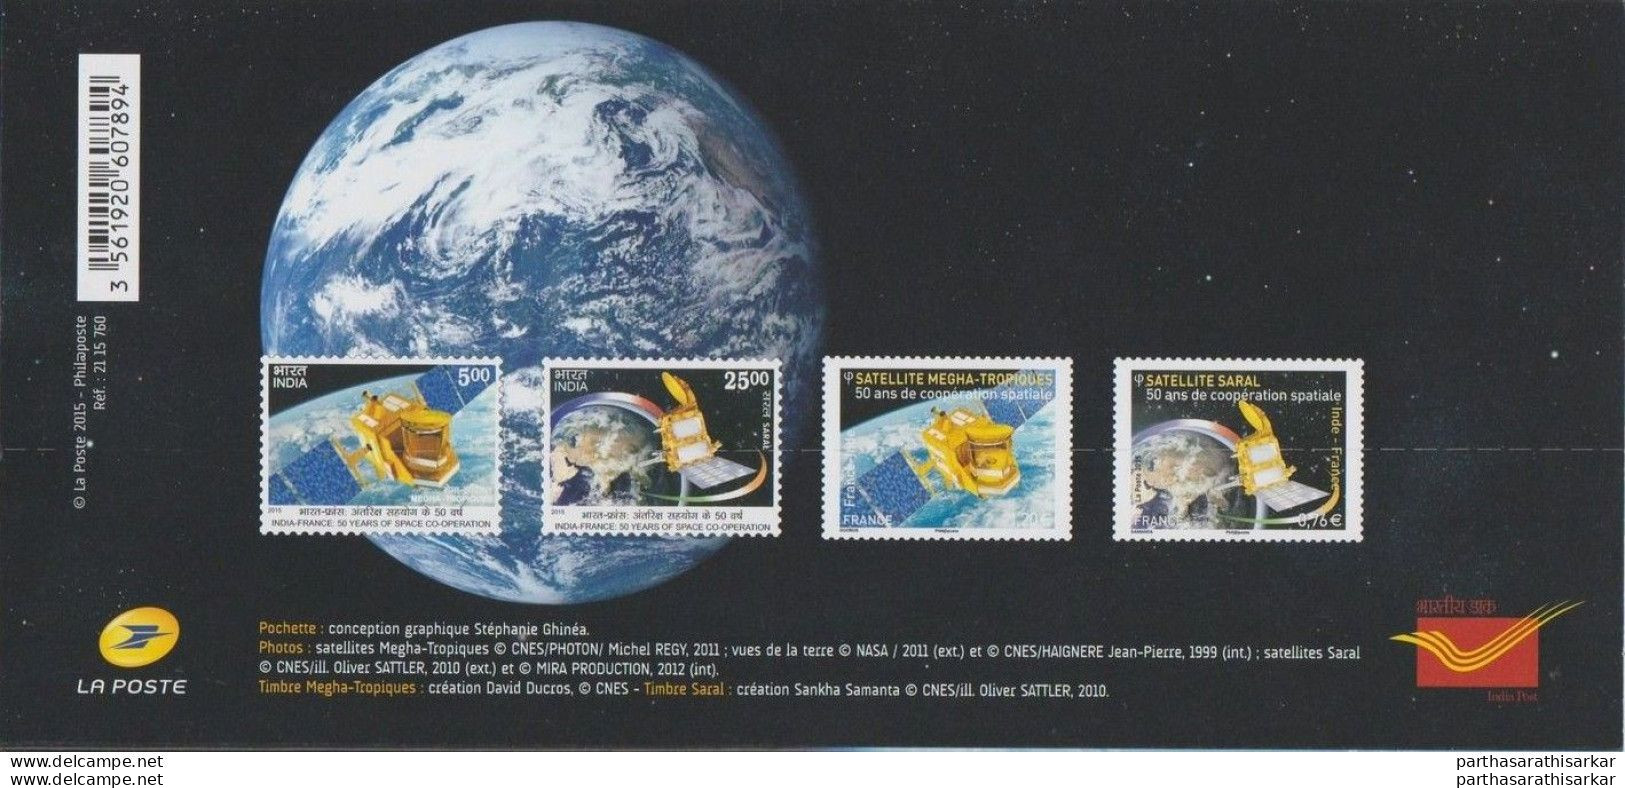 FRANCE 2015 JOINT ISSUE WITH INDIA SPACE PROGRAM OFFICIAL PRESENTATION PACK EXTREMELY RARE HARD TO FIND MNH - 2013-2018 Marianne De Ciappa-Kawena